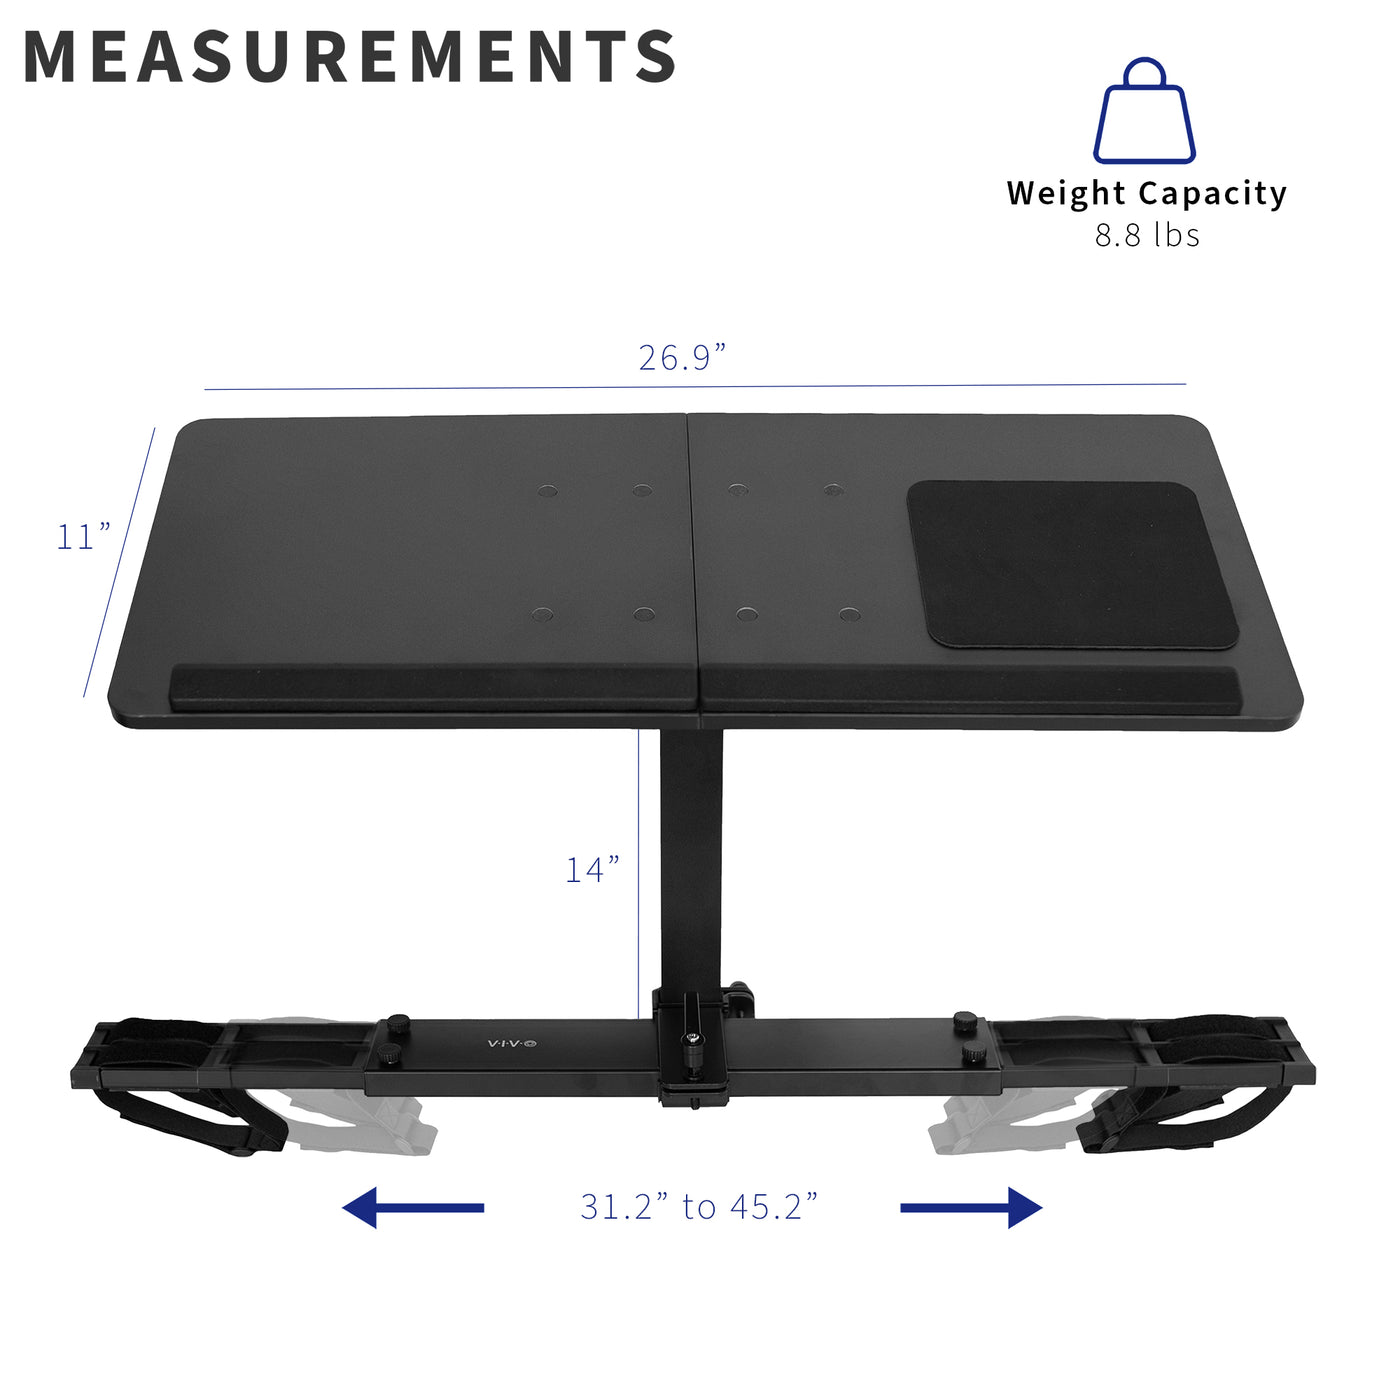 Weight capacity and dimensions of a height-adjustable treadmill laptop stand.